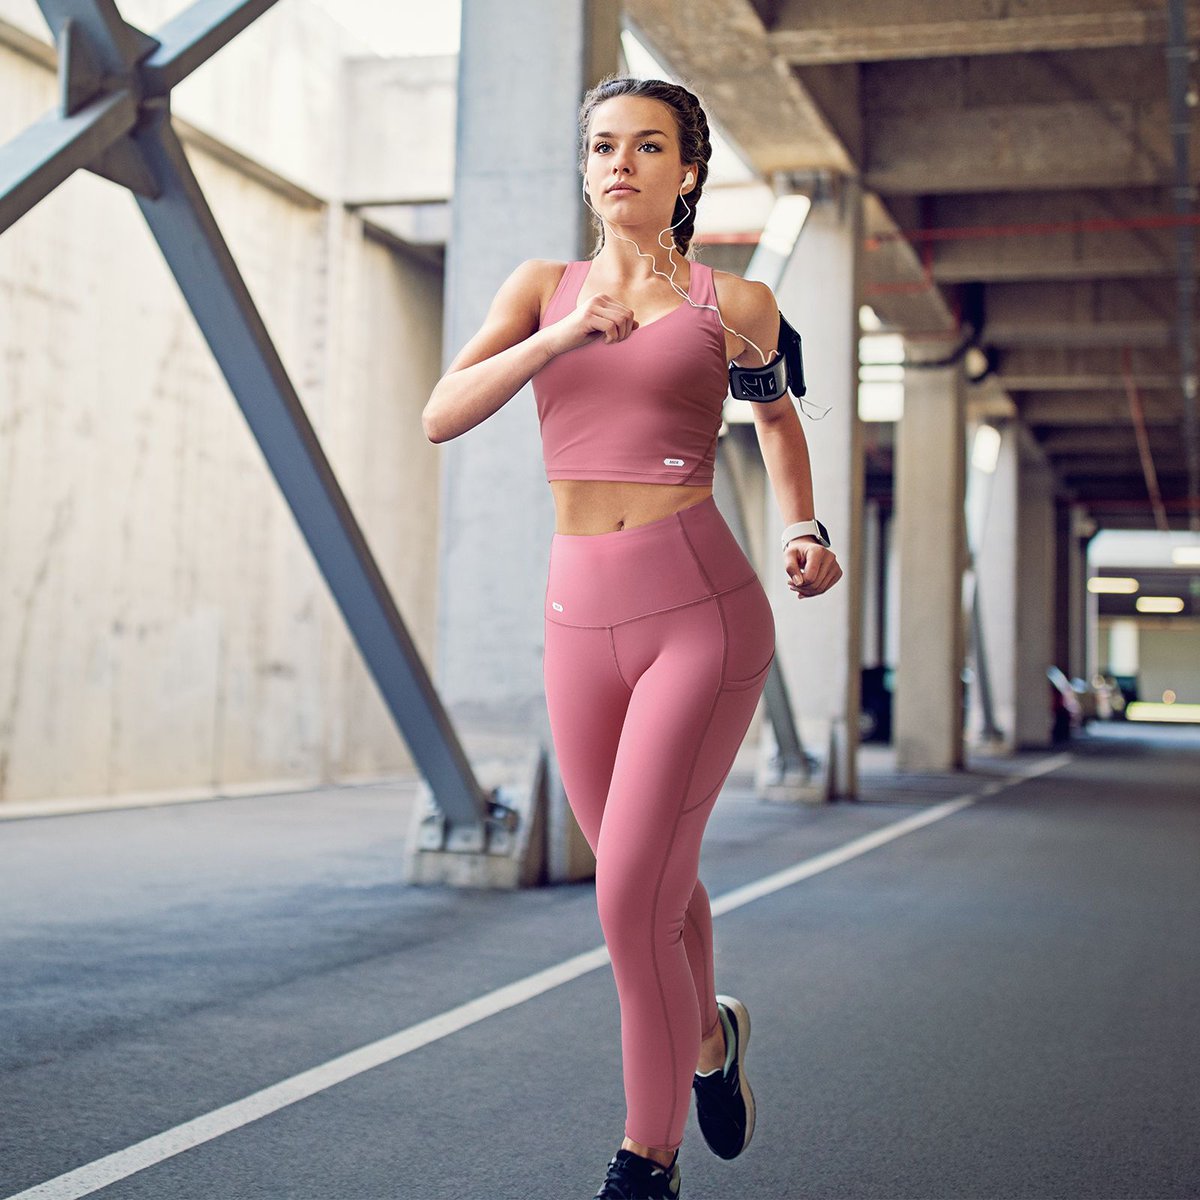 Check out our versatile workout gear! Soft, stretchy, and available in various colors. Perfect for low-impact exercises or daily wear. Get yours now for comfy support that fits just right! #engineeredformotion #running #roadrunning #sweatpants #sportsbra #croptank #running